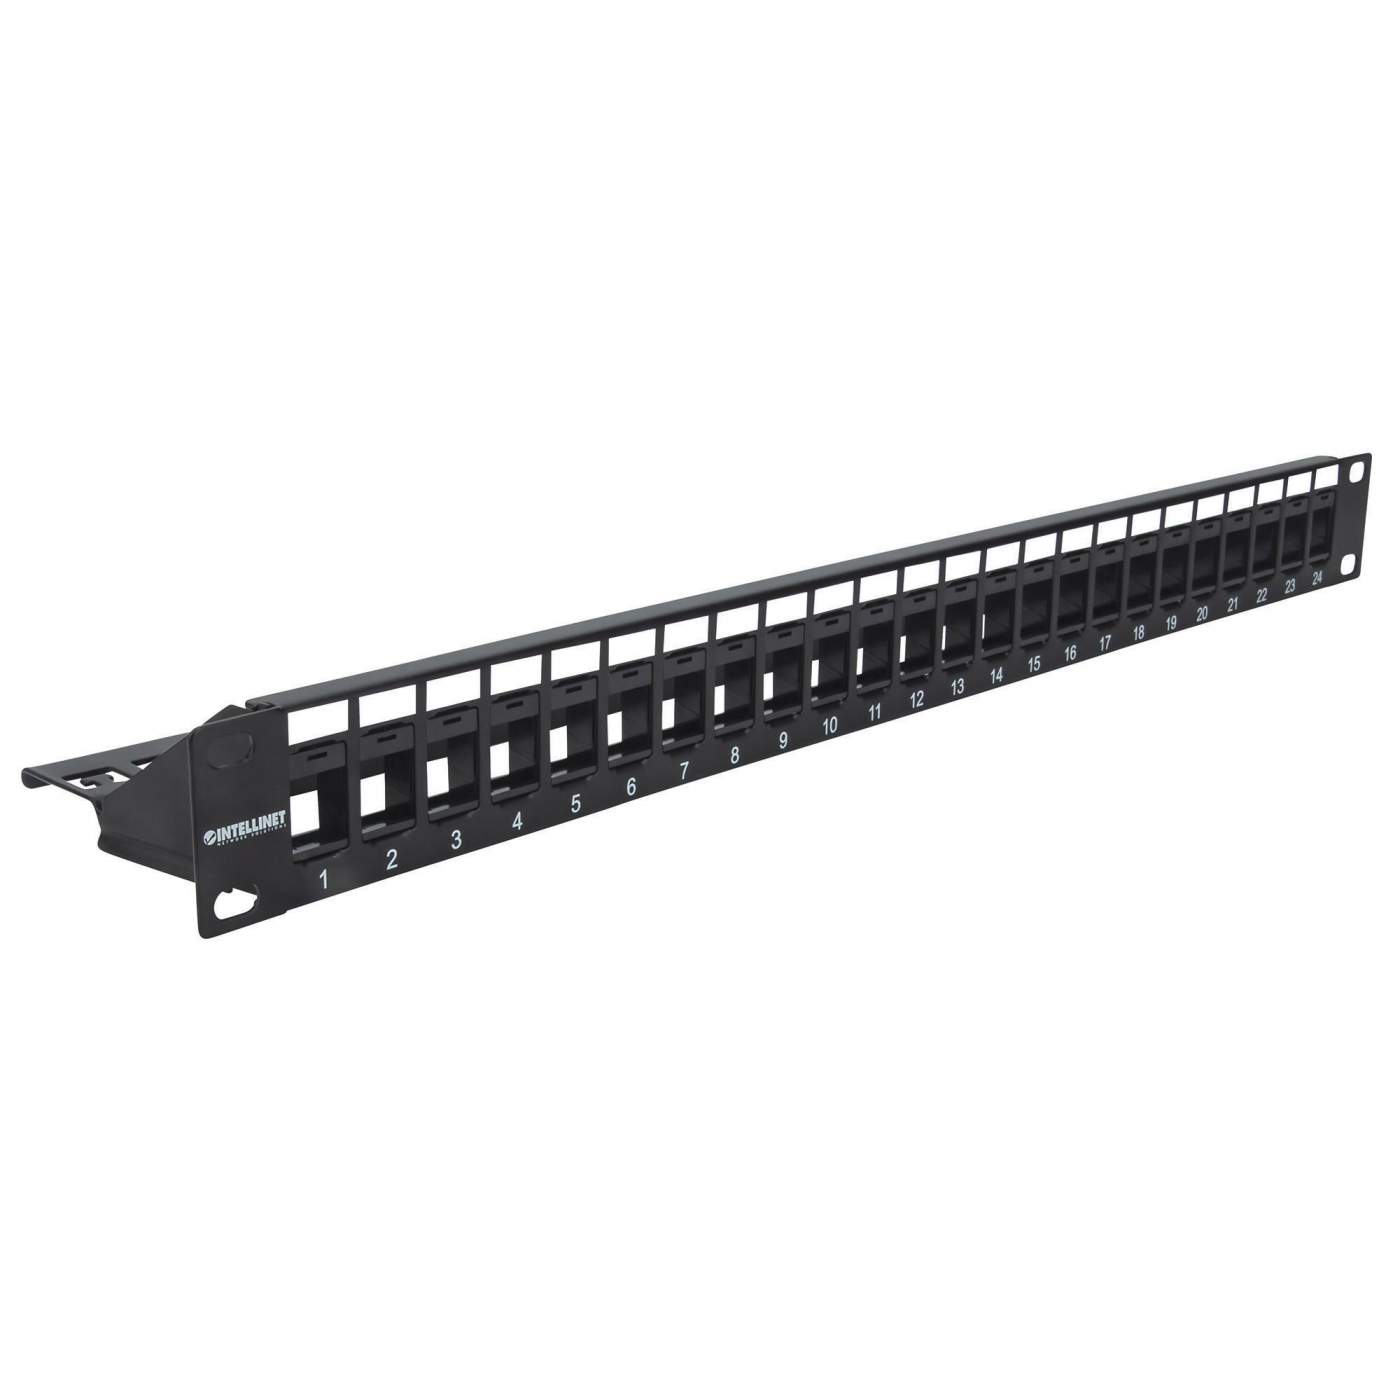 Blank Patch Panel Image 2